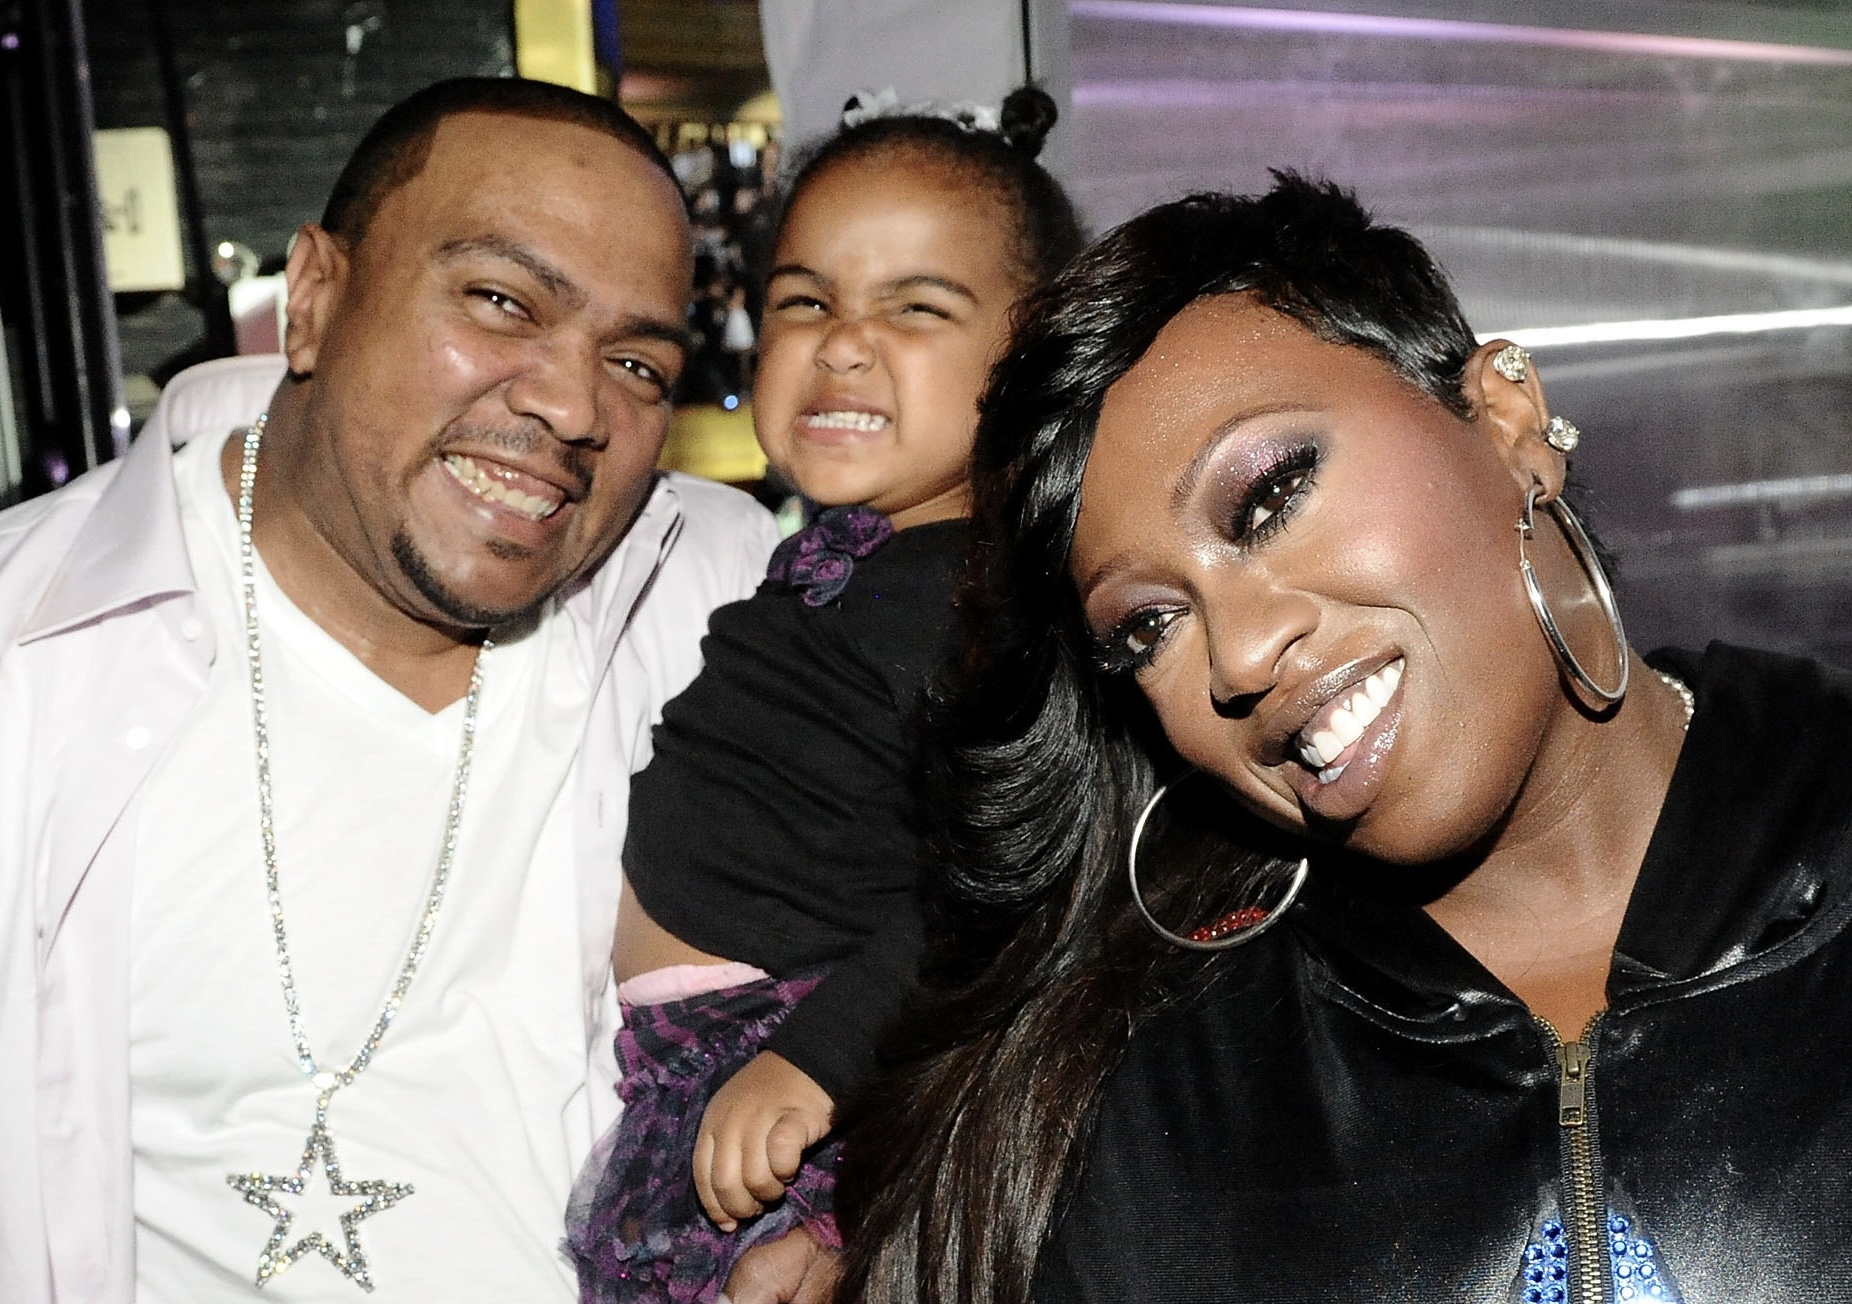 Timbaland Credits Missy Elliot For His Success, ‘If It Wasn’t For Missy, I Probably Wouldn’t Be Timbaland’